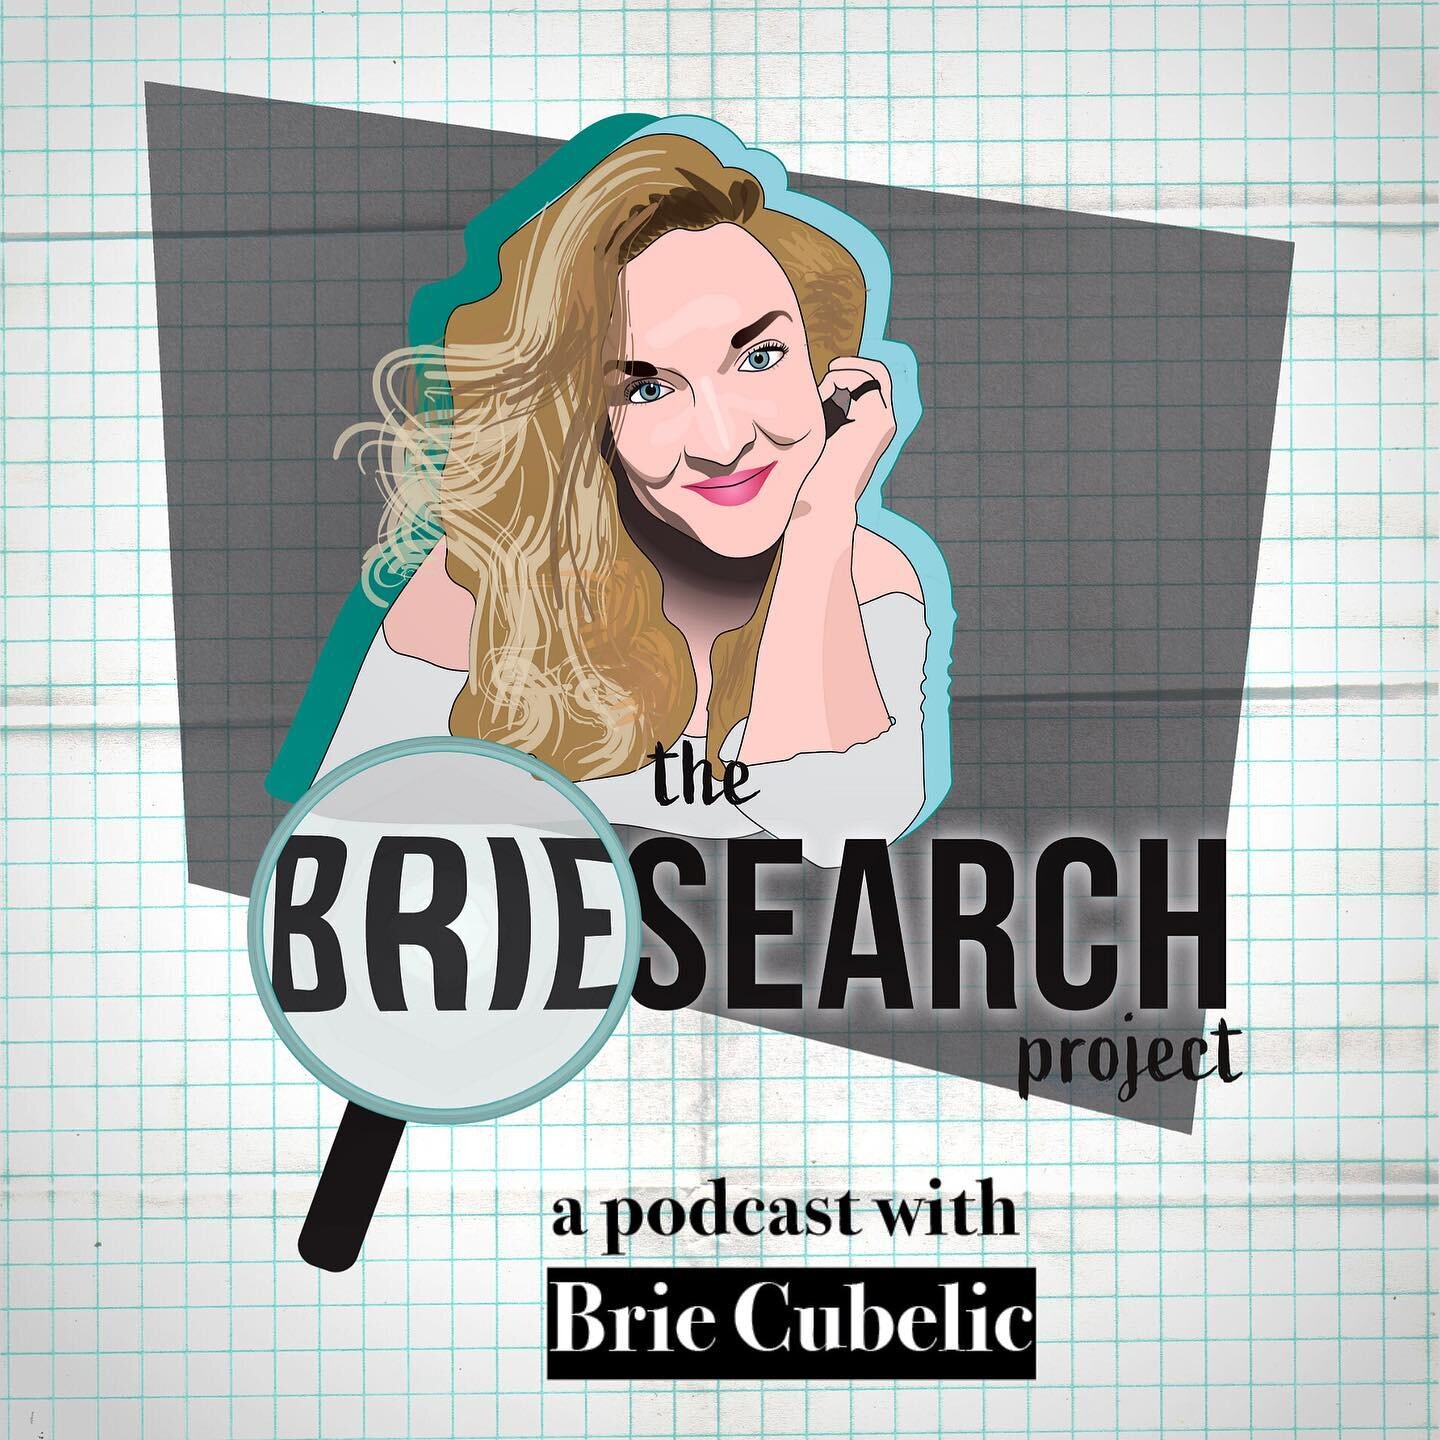 It&rsquo;s national podcast day! So what better day to launch The @briesearch Project podcast?!
The first 3 episodes are out now and I can&rsquo;t wait to share how it grows over the course of the season.
Please go like or subscribe or, y&rsquo;know,